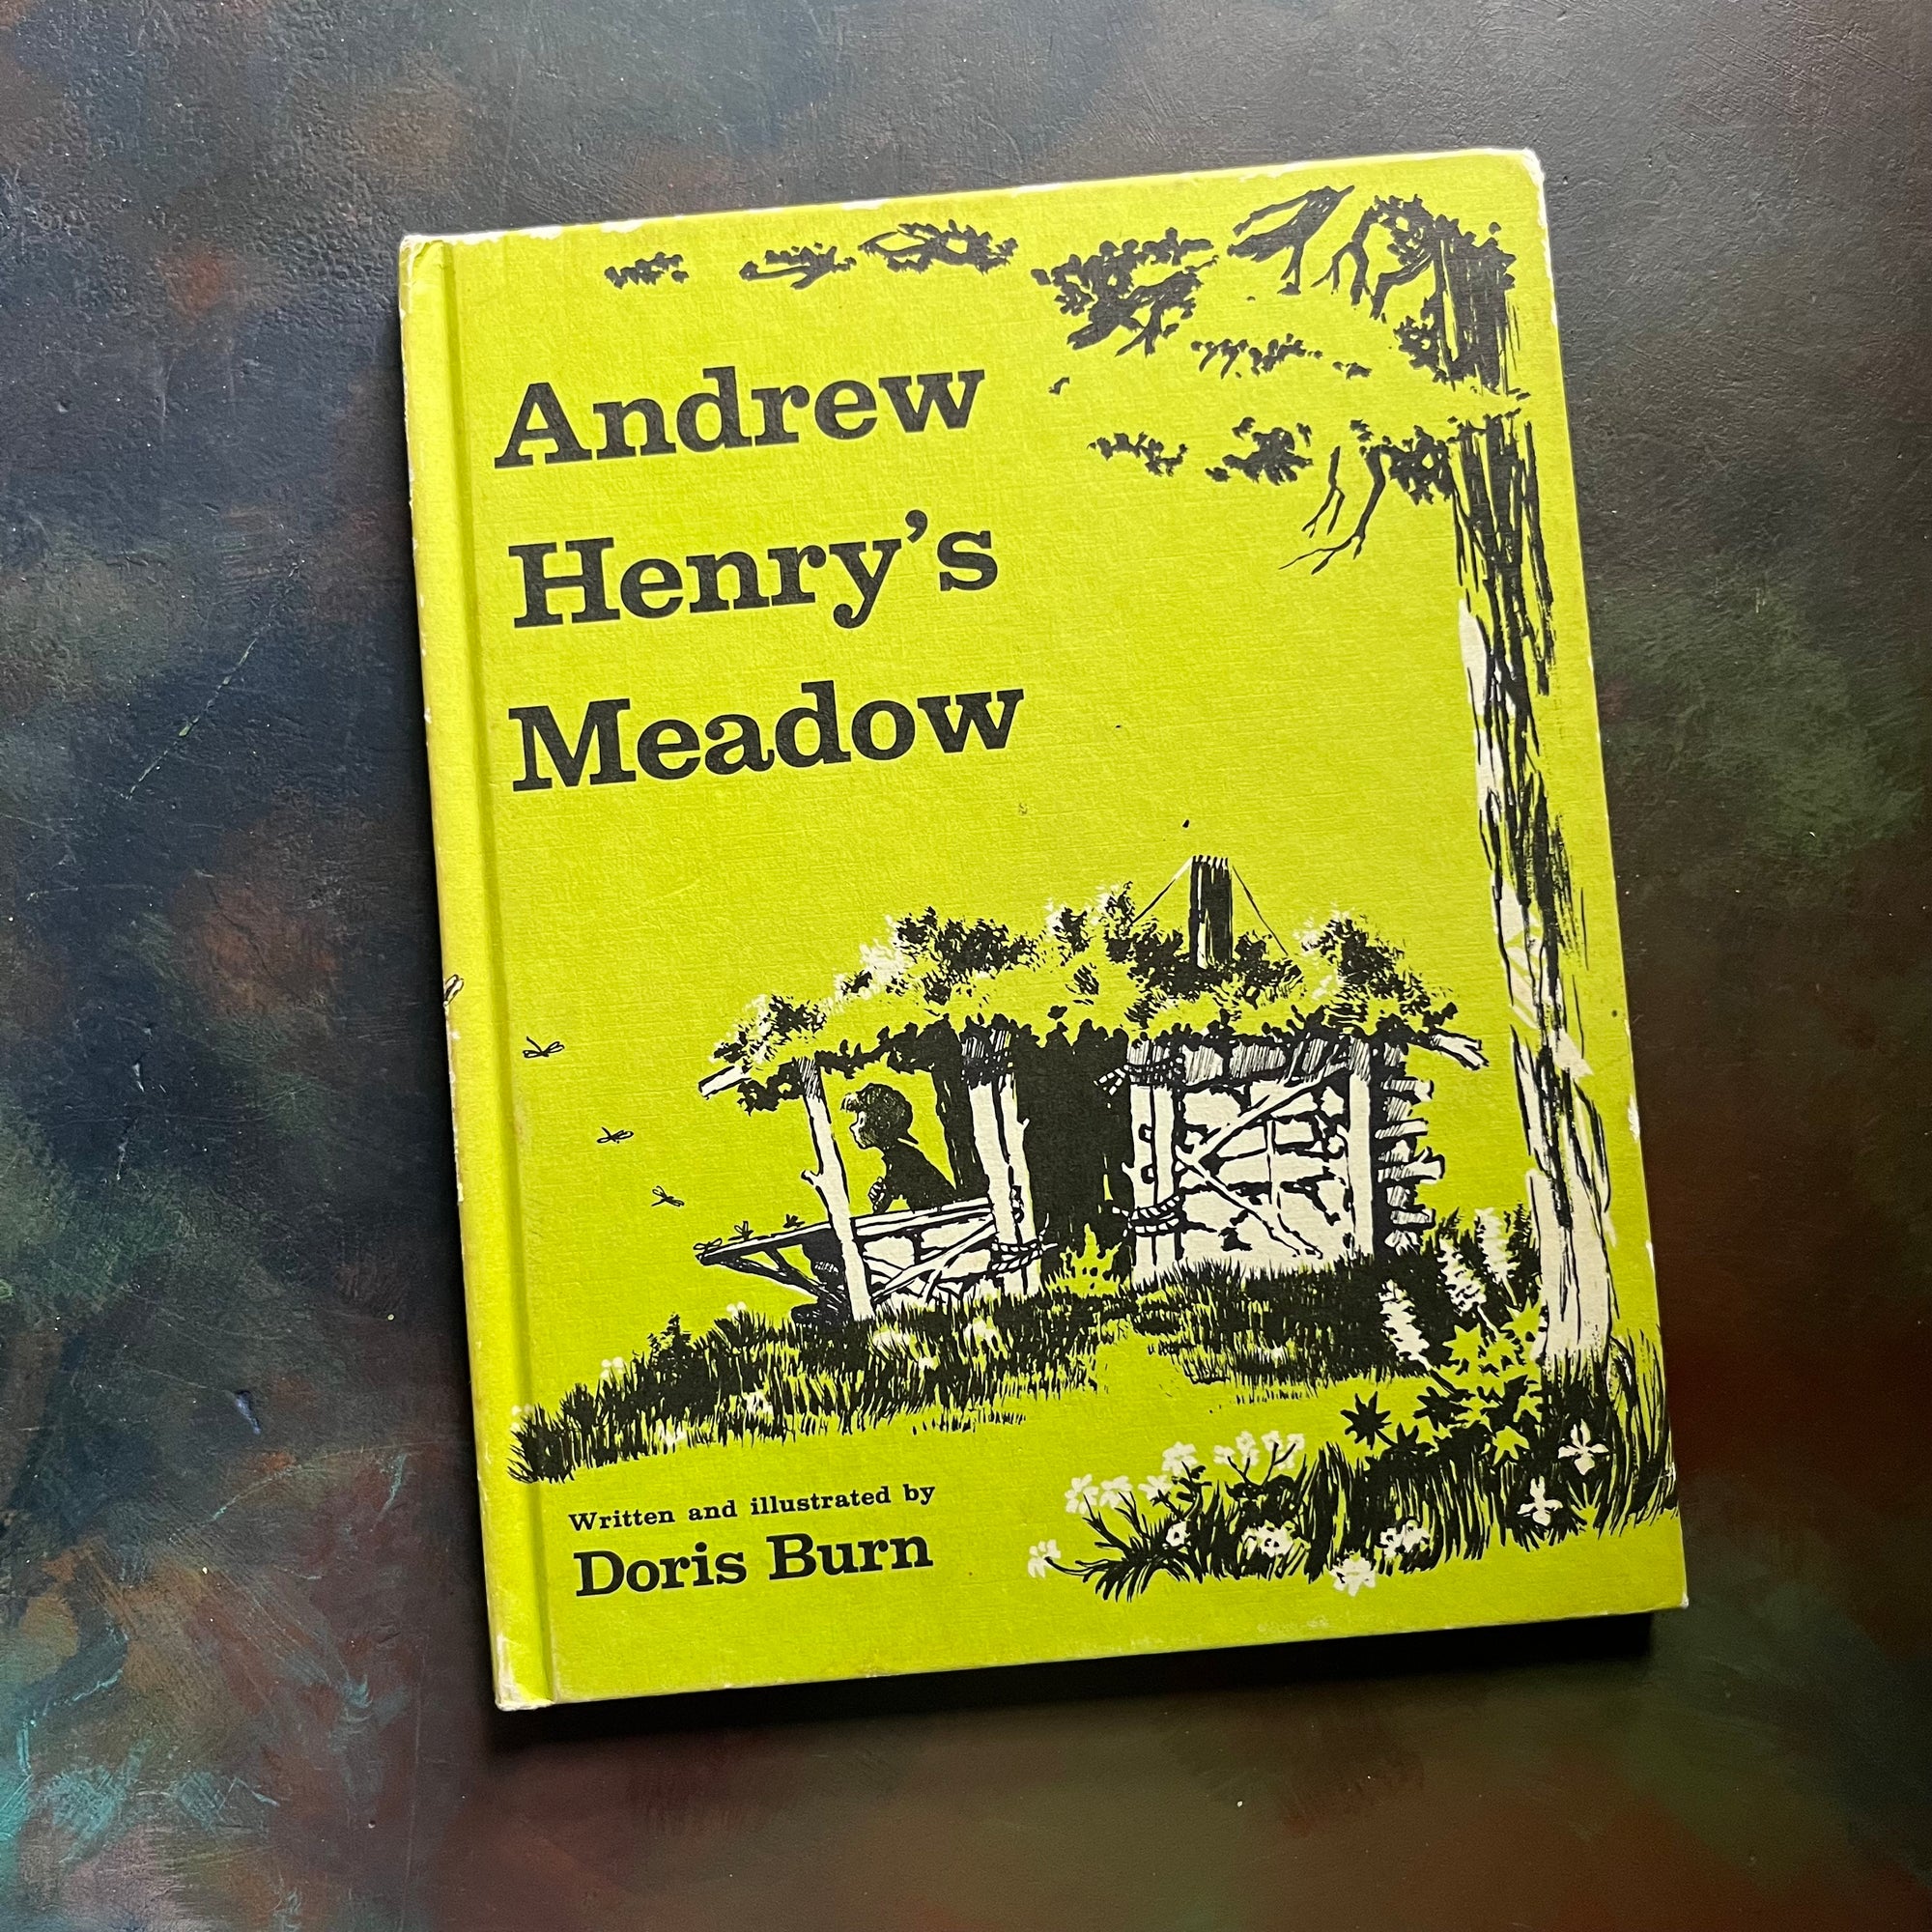 Andrew Henry's Meadow written & illustrated by Doris Burn-vintage children's picture book-1965 Weekly Reader Edition-view of the front cover